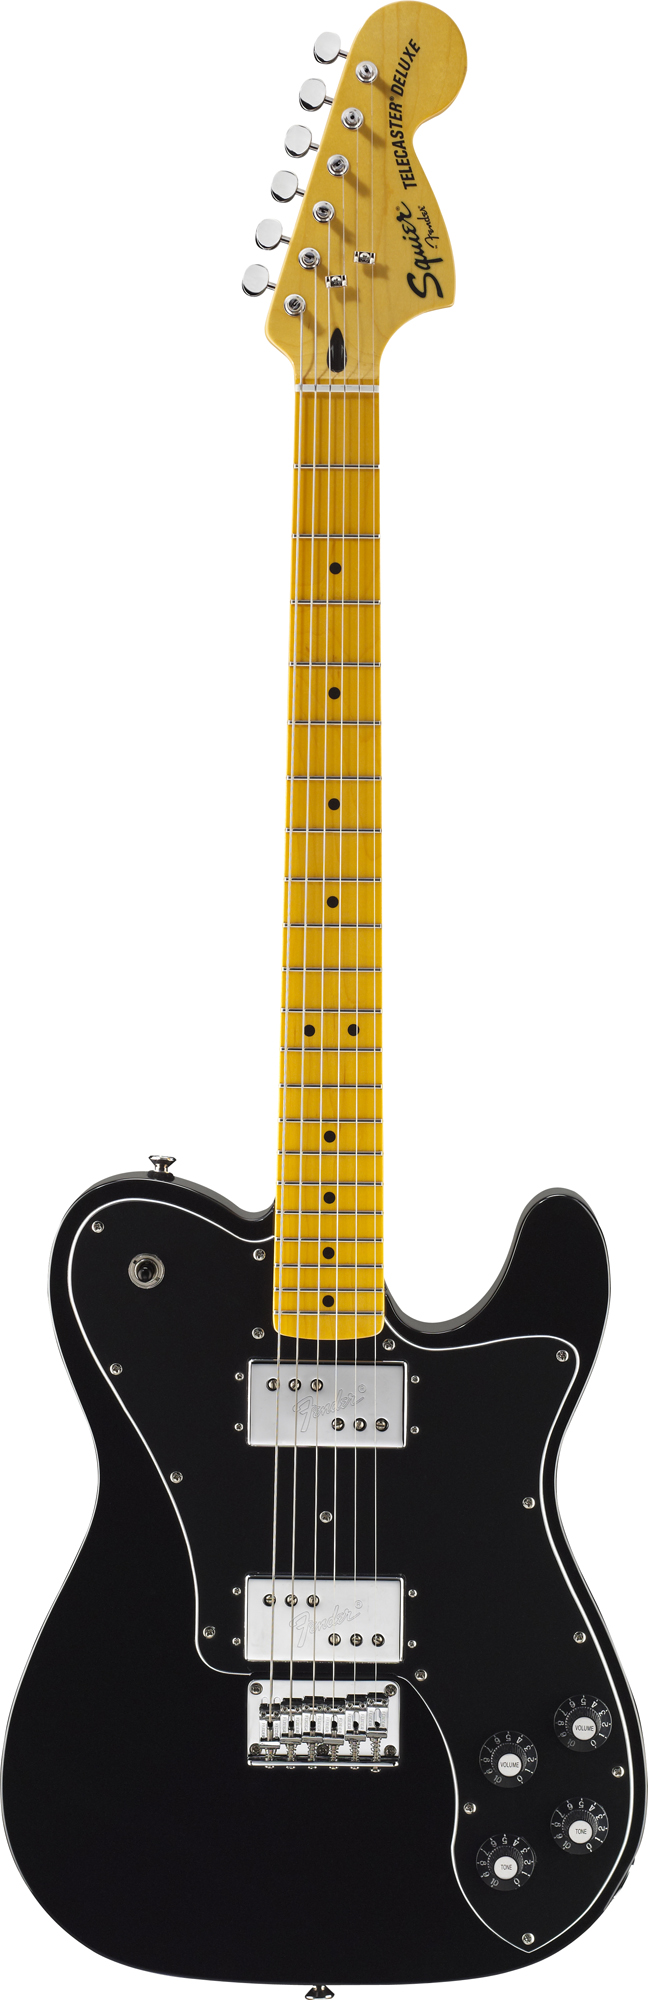 Vintage Modified Telecaster Deluxe